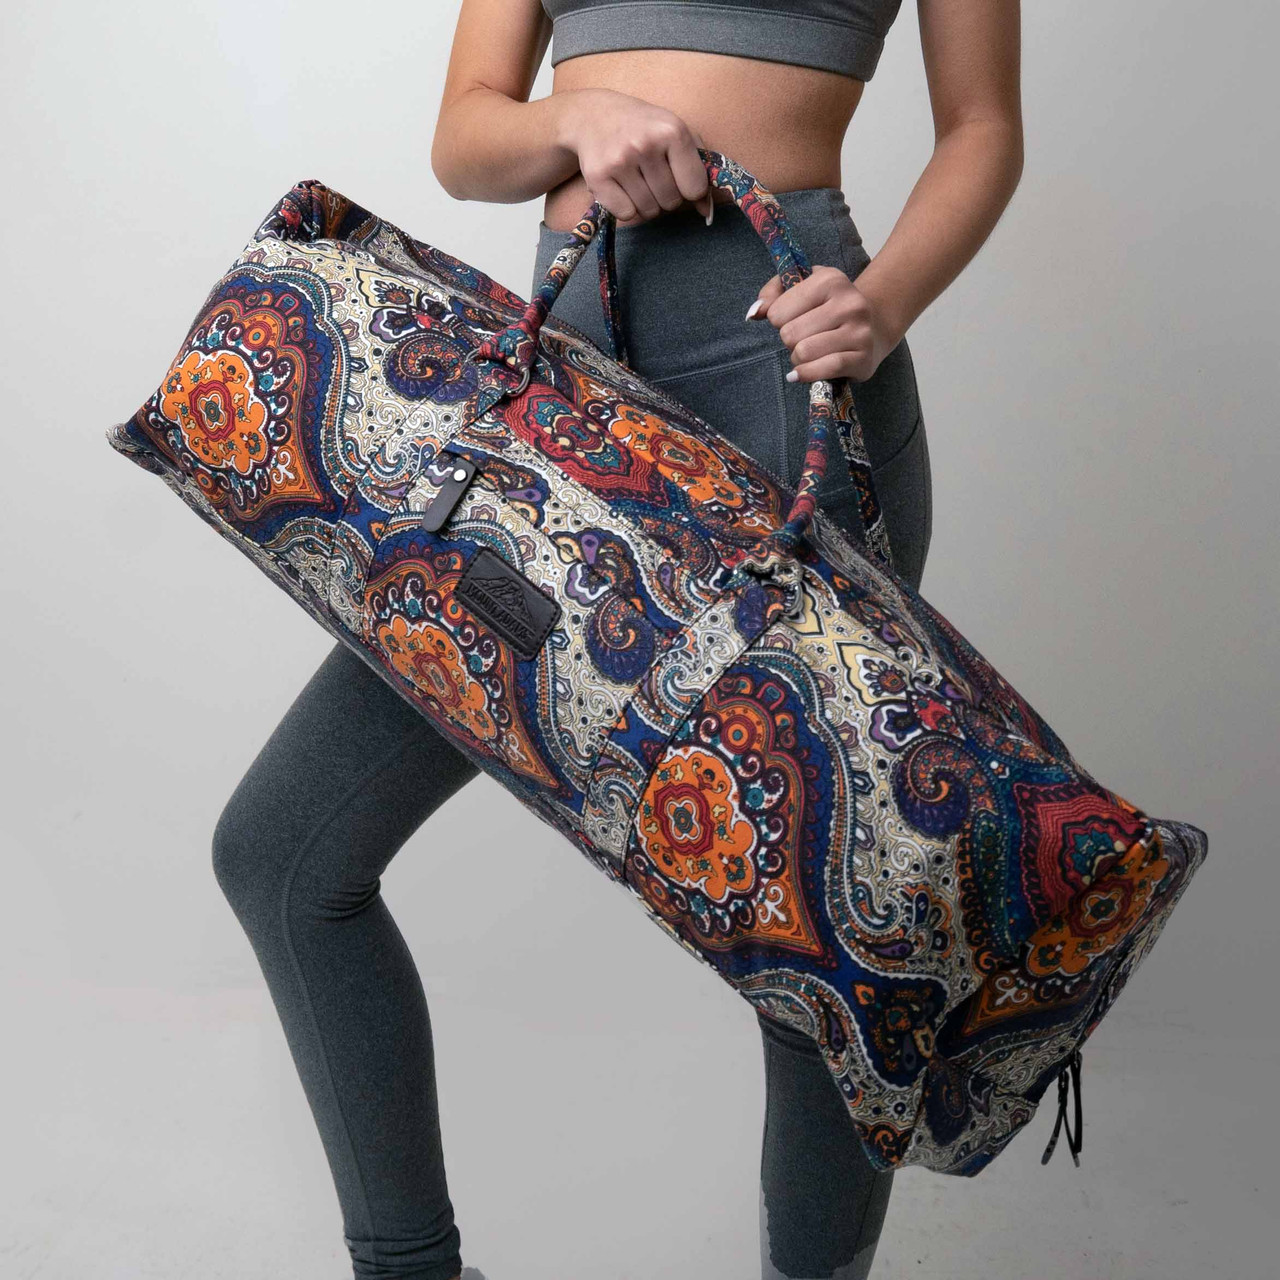 Yoga Mat XL Duffel Bag Extra Large Patterned Canvas with Pocket and Zipper